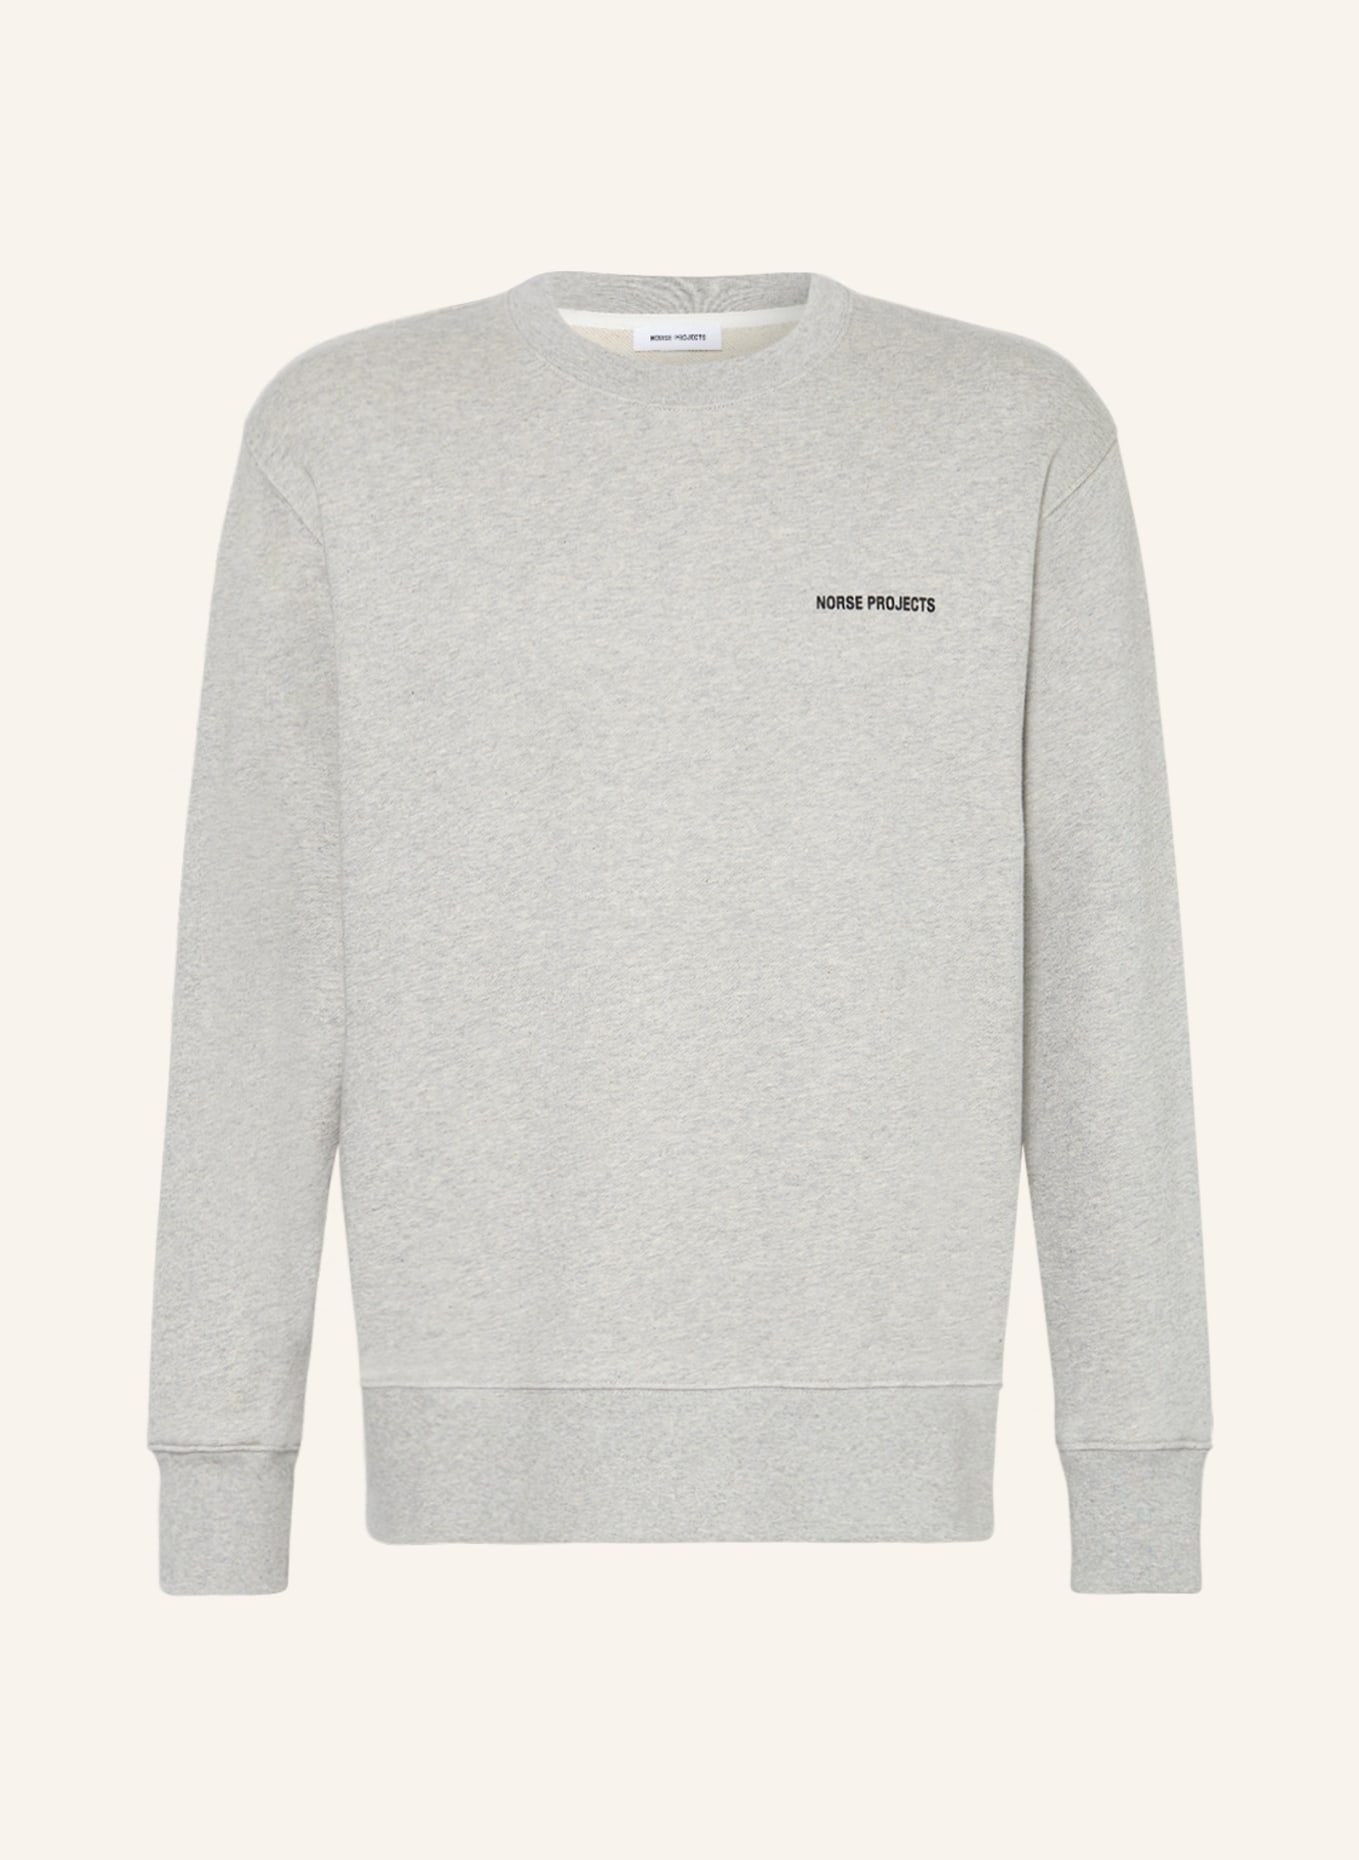 NORSE PROJECTS Sweatshirt ARNE, Color: LIGHT GRAY (Image 1)